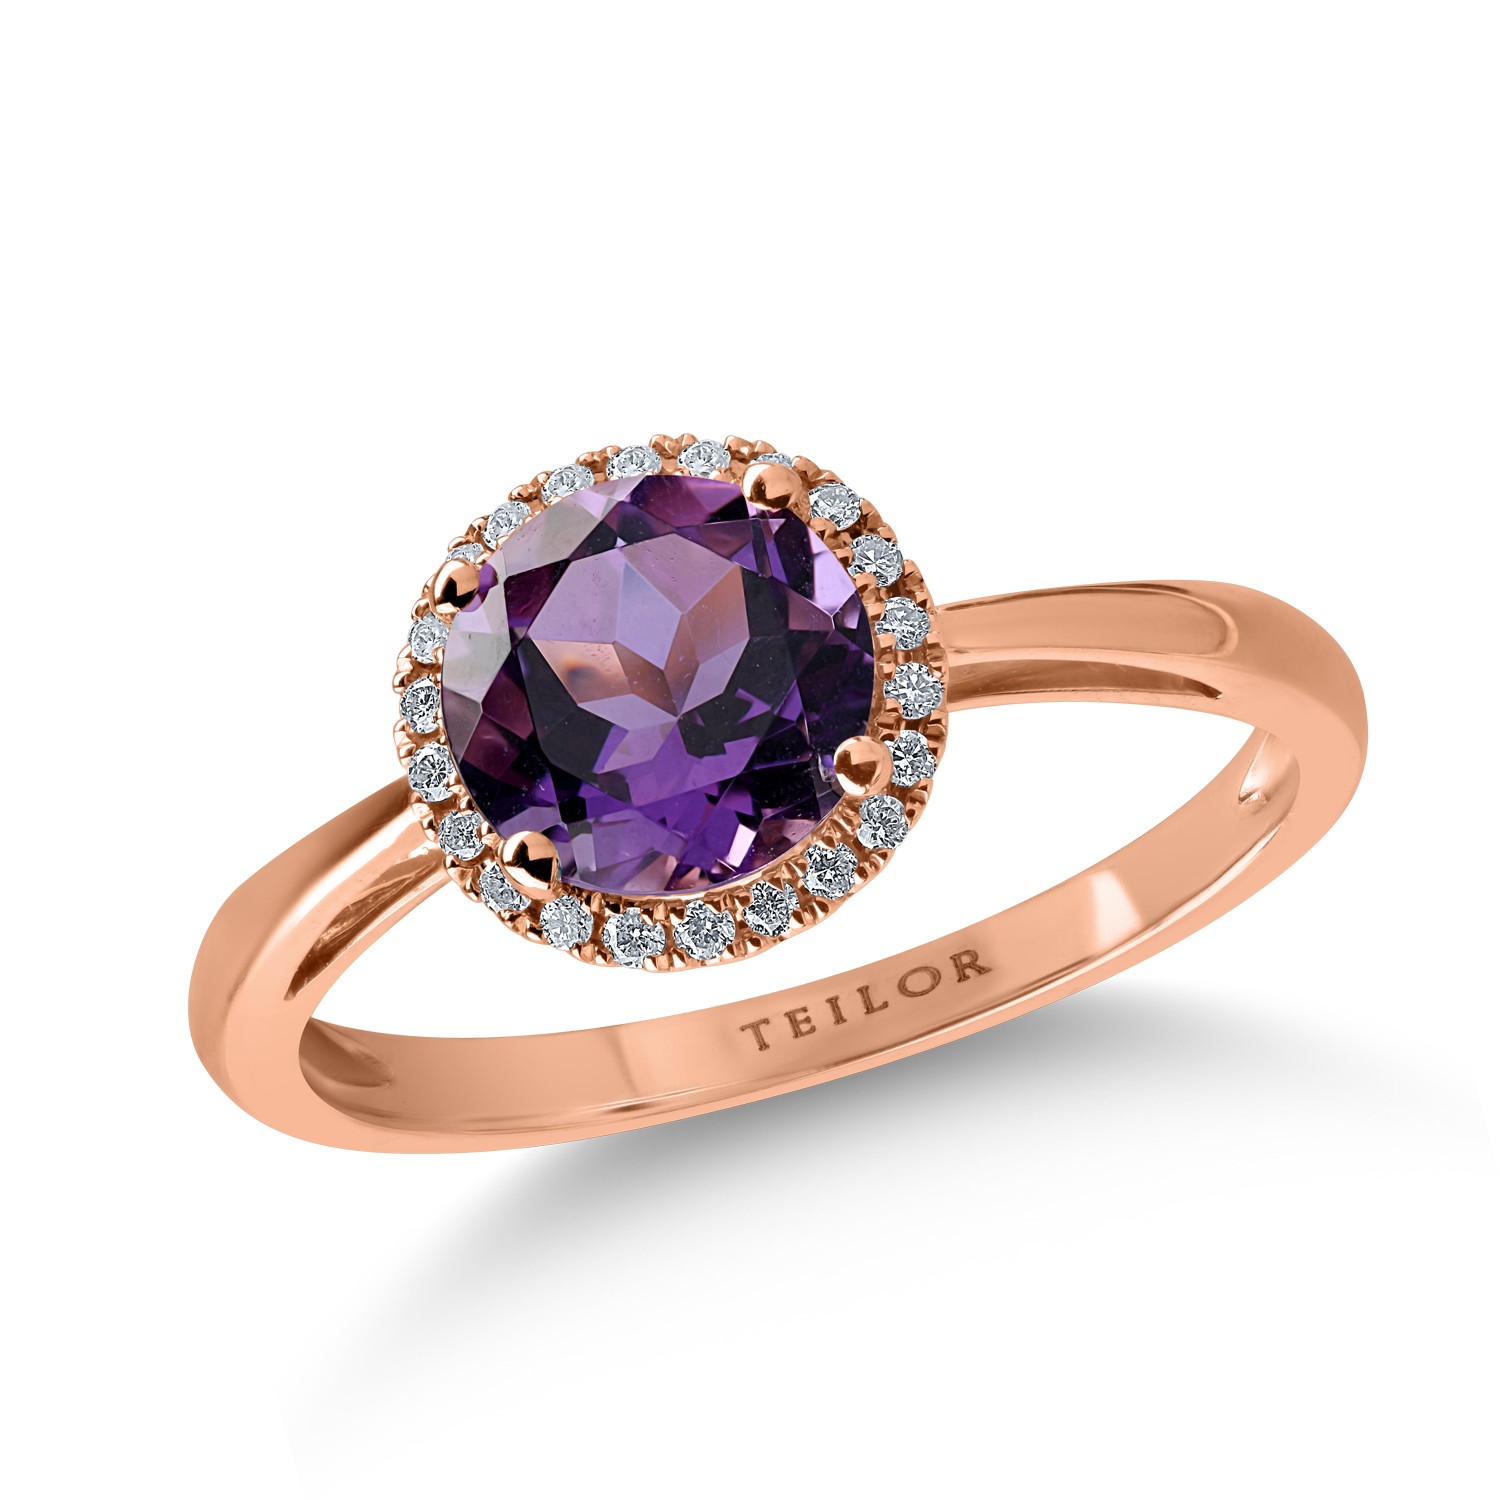 Rose gold ring with 1.3ct amethyst and 0.1ct diamonds